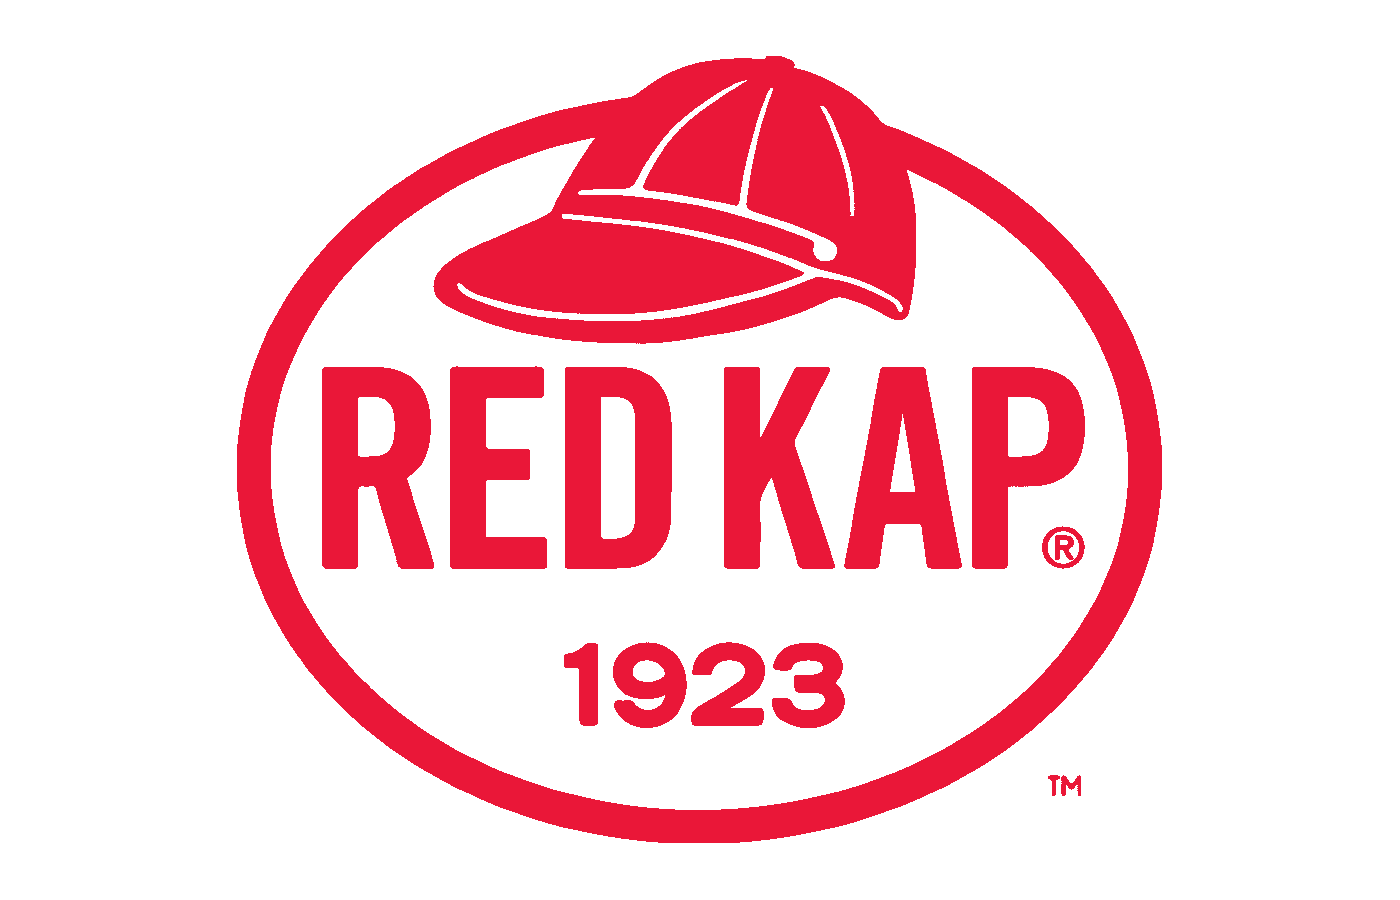 Red Kap logo and symbol, meaning, history, PNG